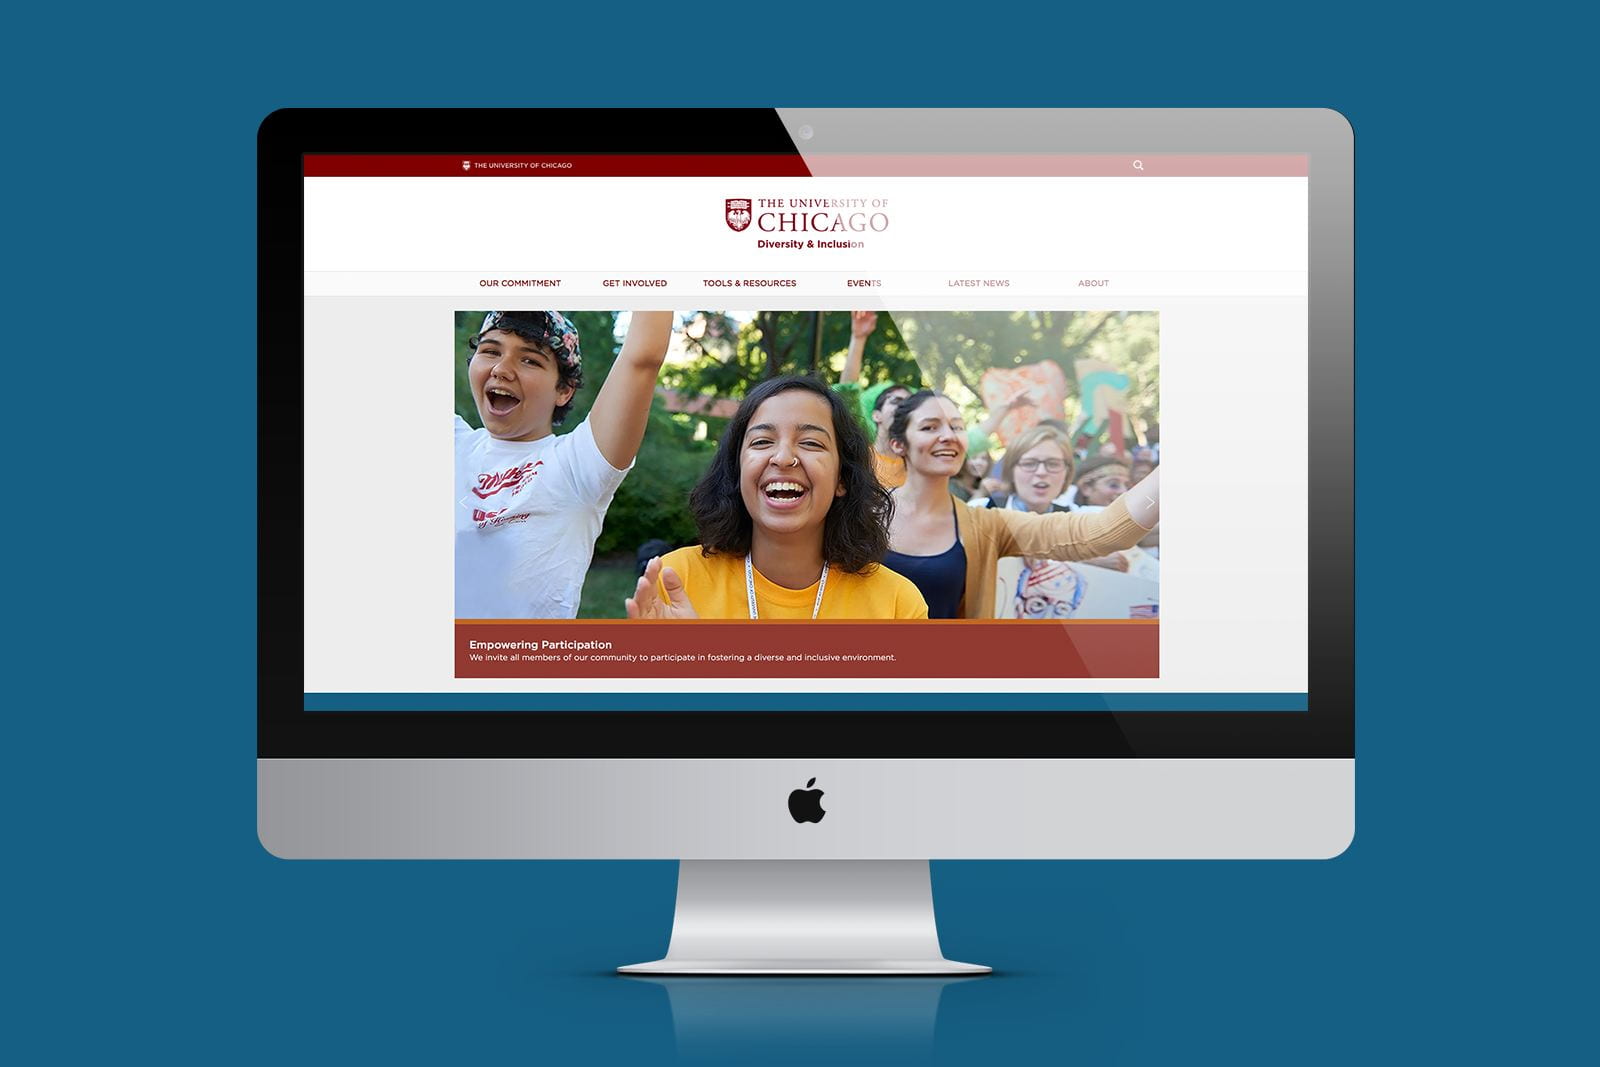 The University of Chicago Diversity and Inclusion Website